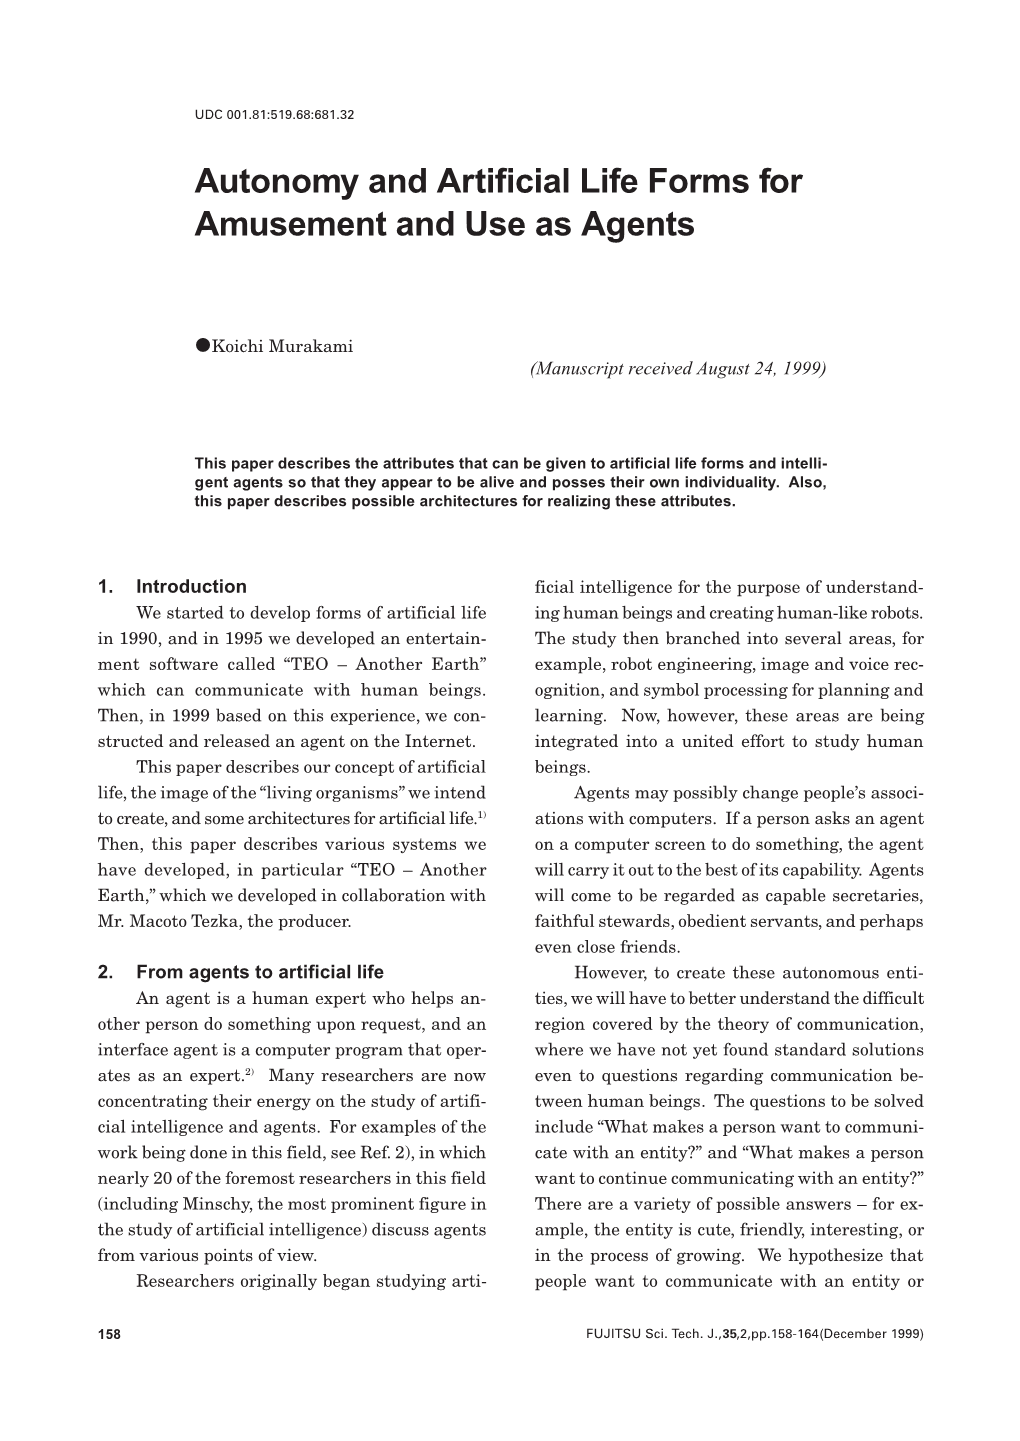 Autonomy and Artificial Life Forms for Amusement and Use As Agents